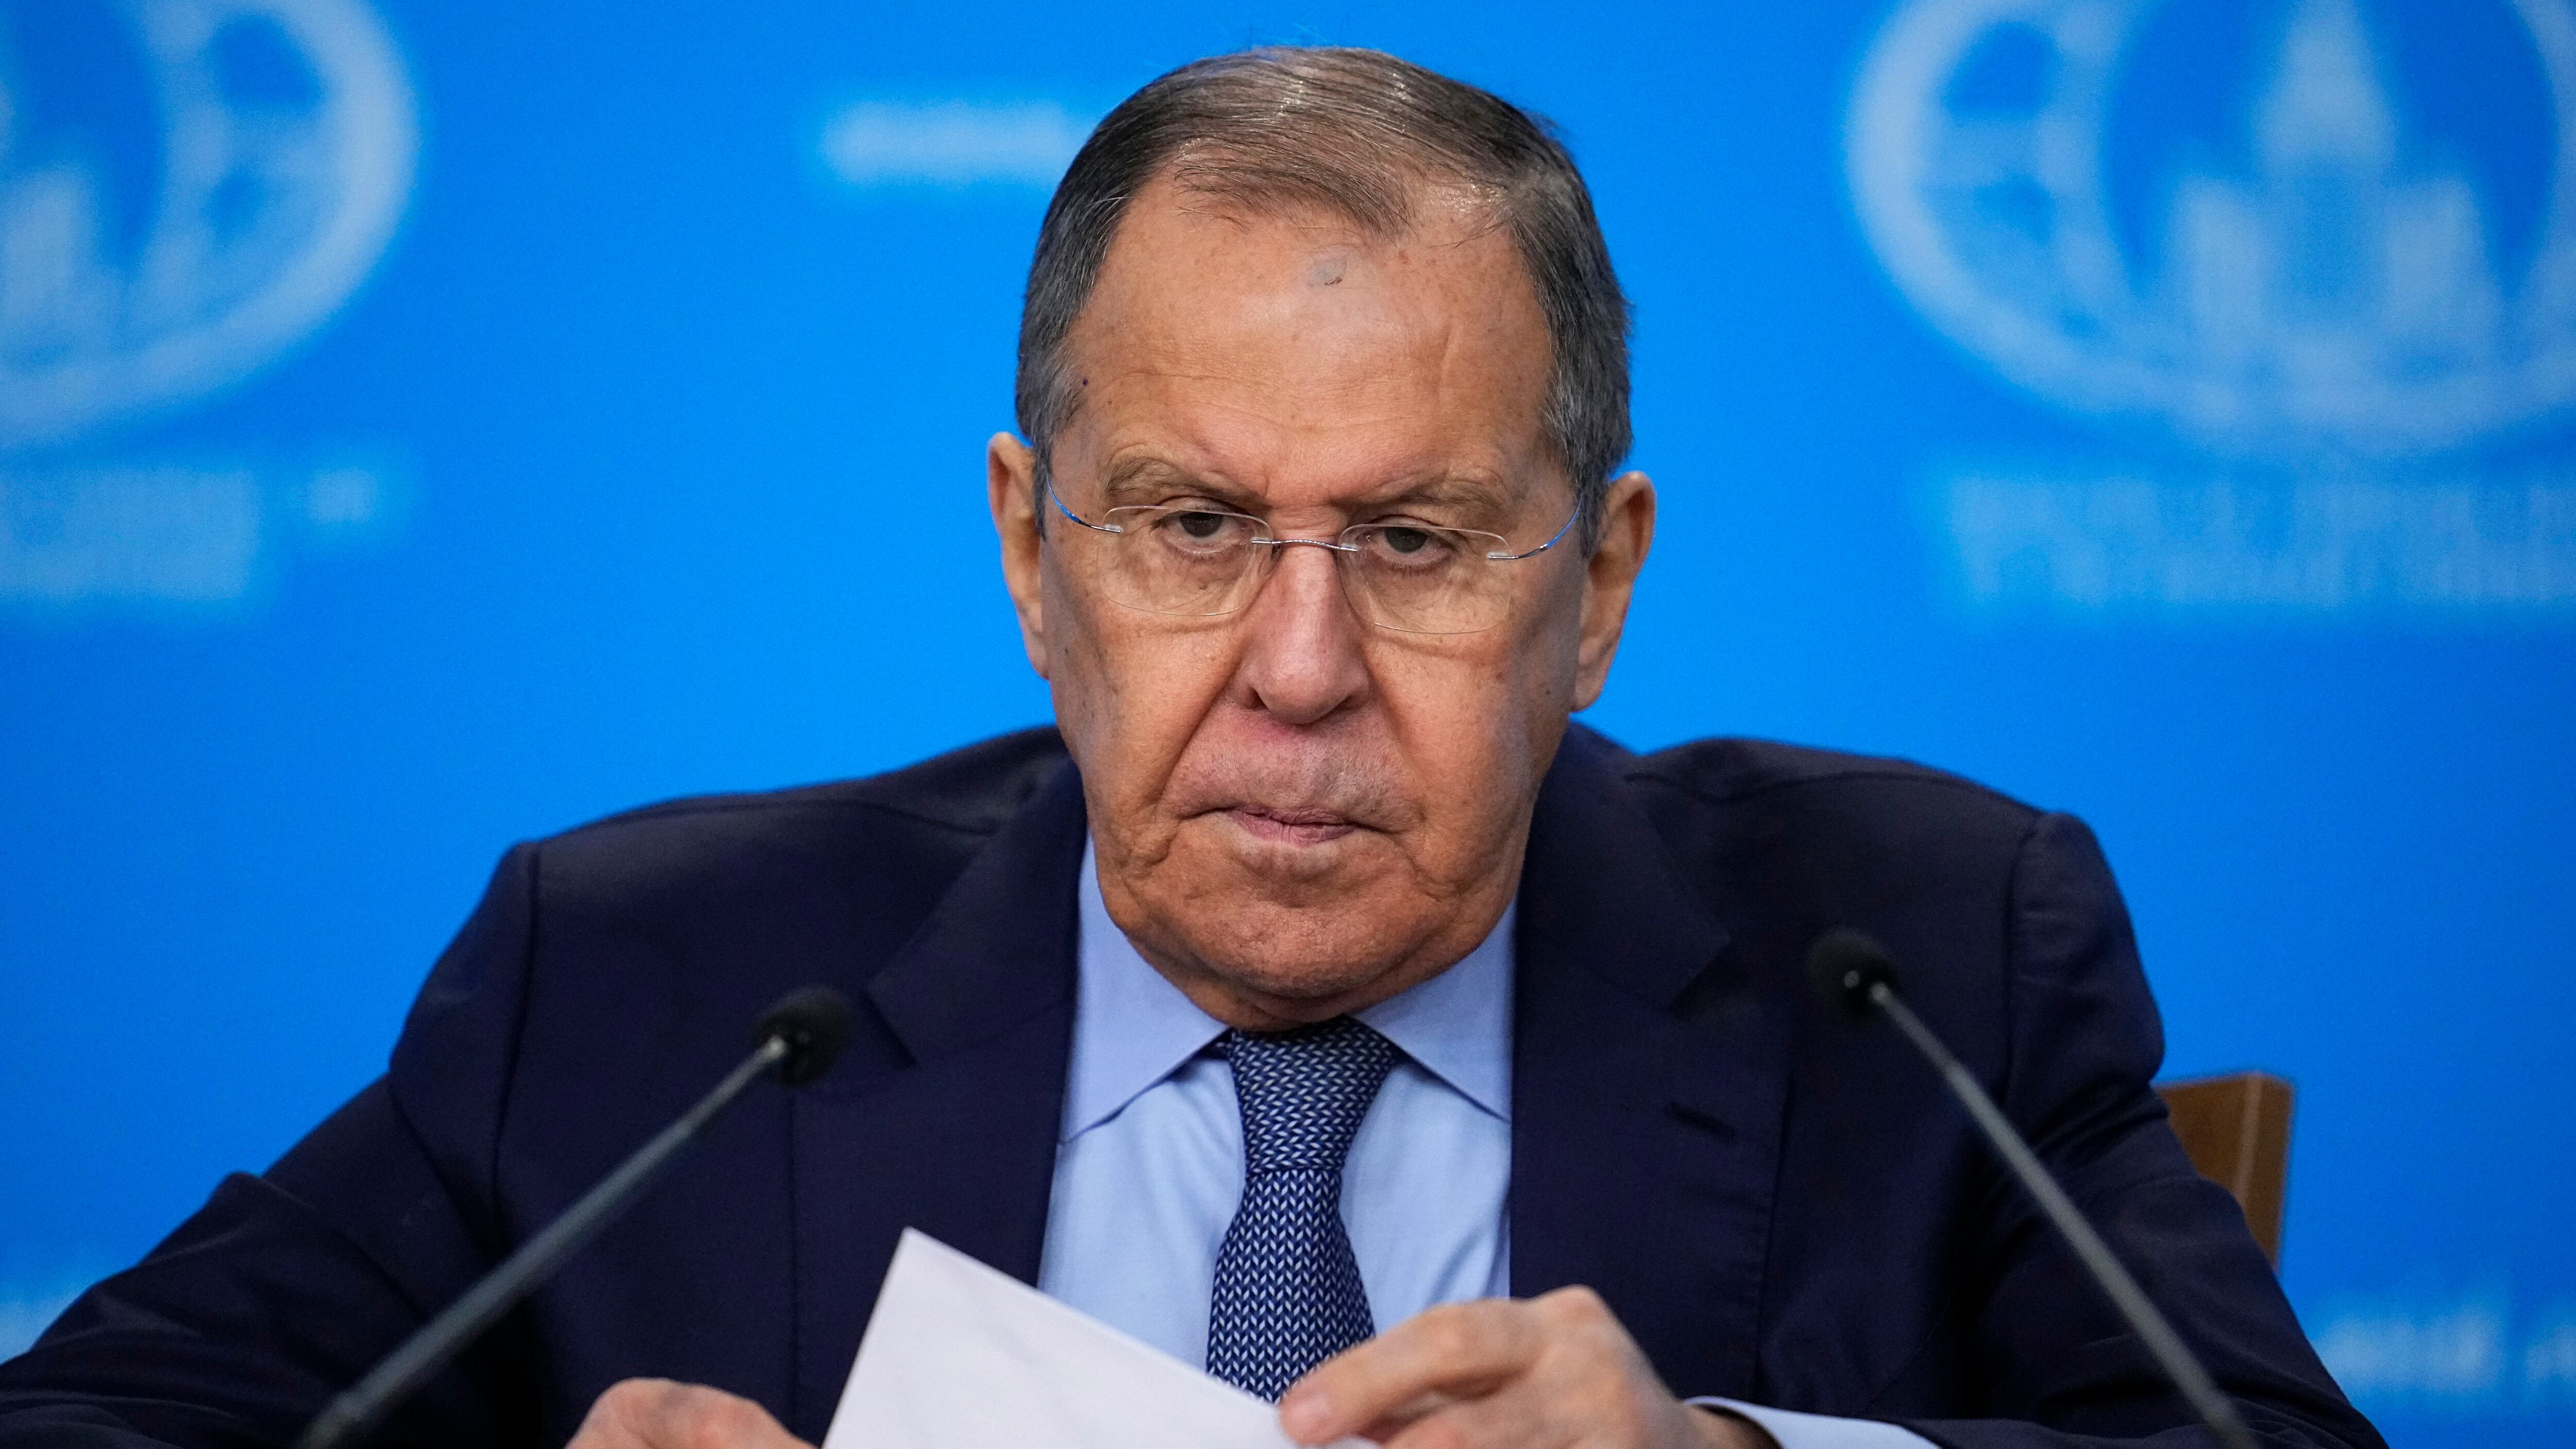 Sergey Lavrov has ruled out the prospect of talks on nuclear arms controls (AP Photo/Alexander Zemlianichenko)